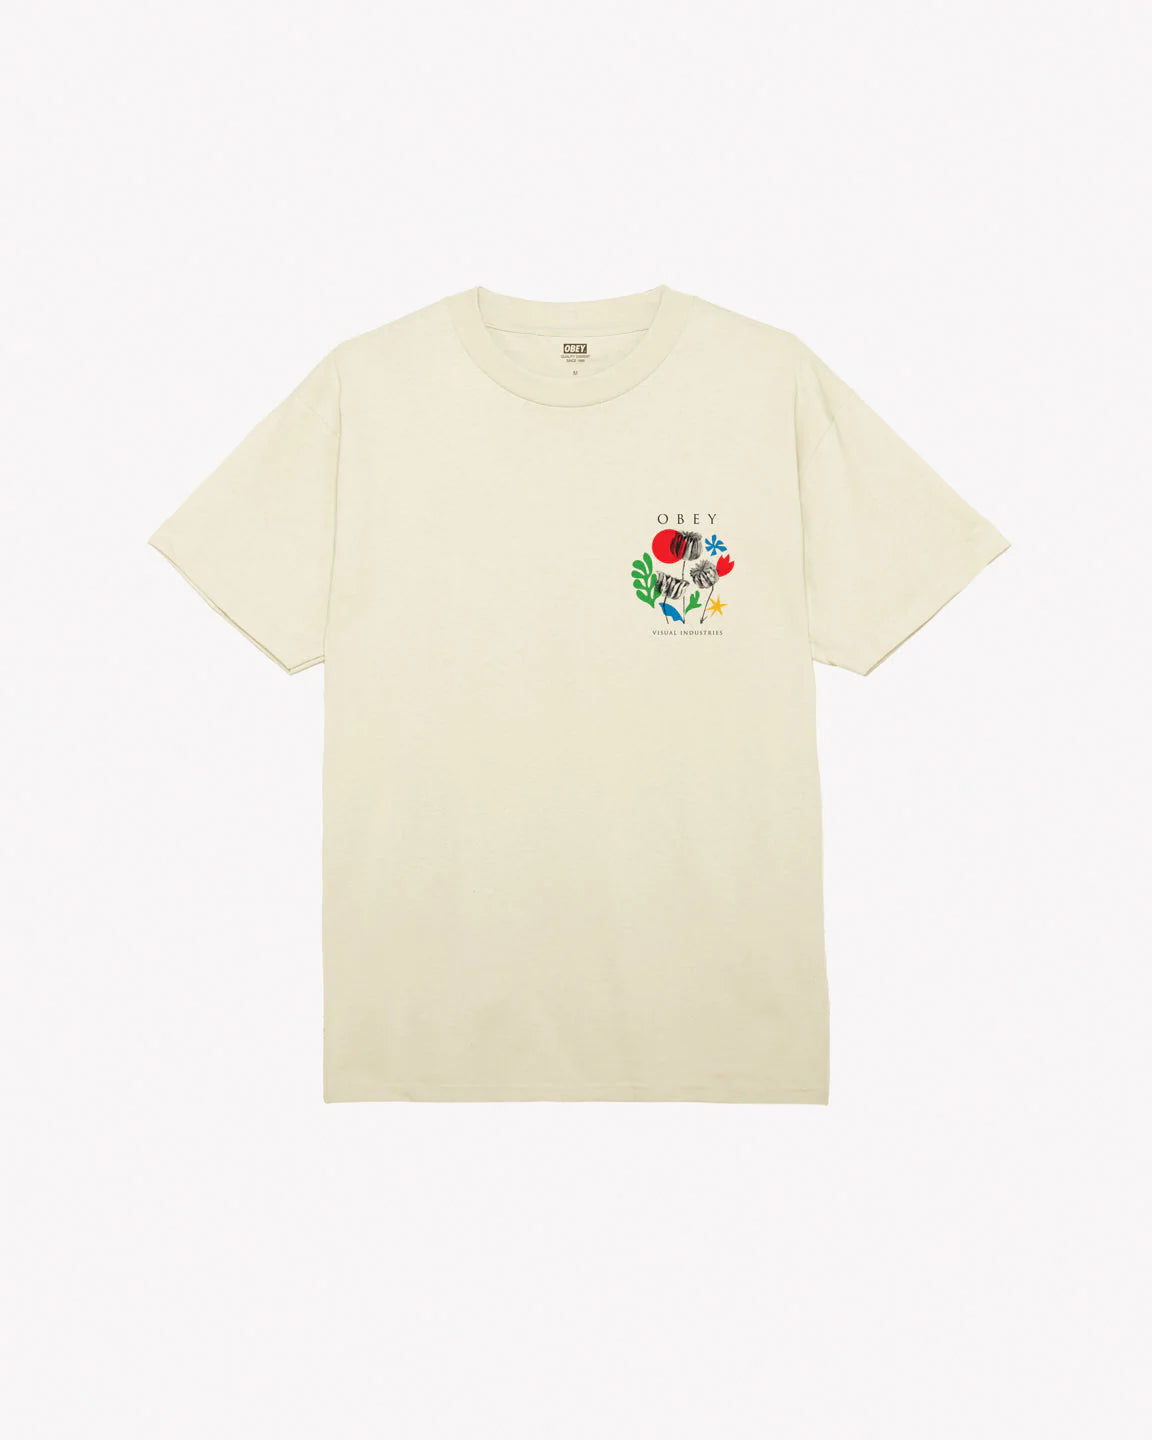 OBEY FLOWERS PAPERS SCISSORS CLASSIC T-SHIRT - Cream